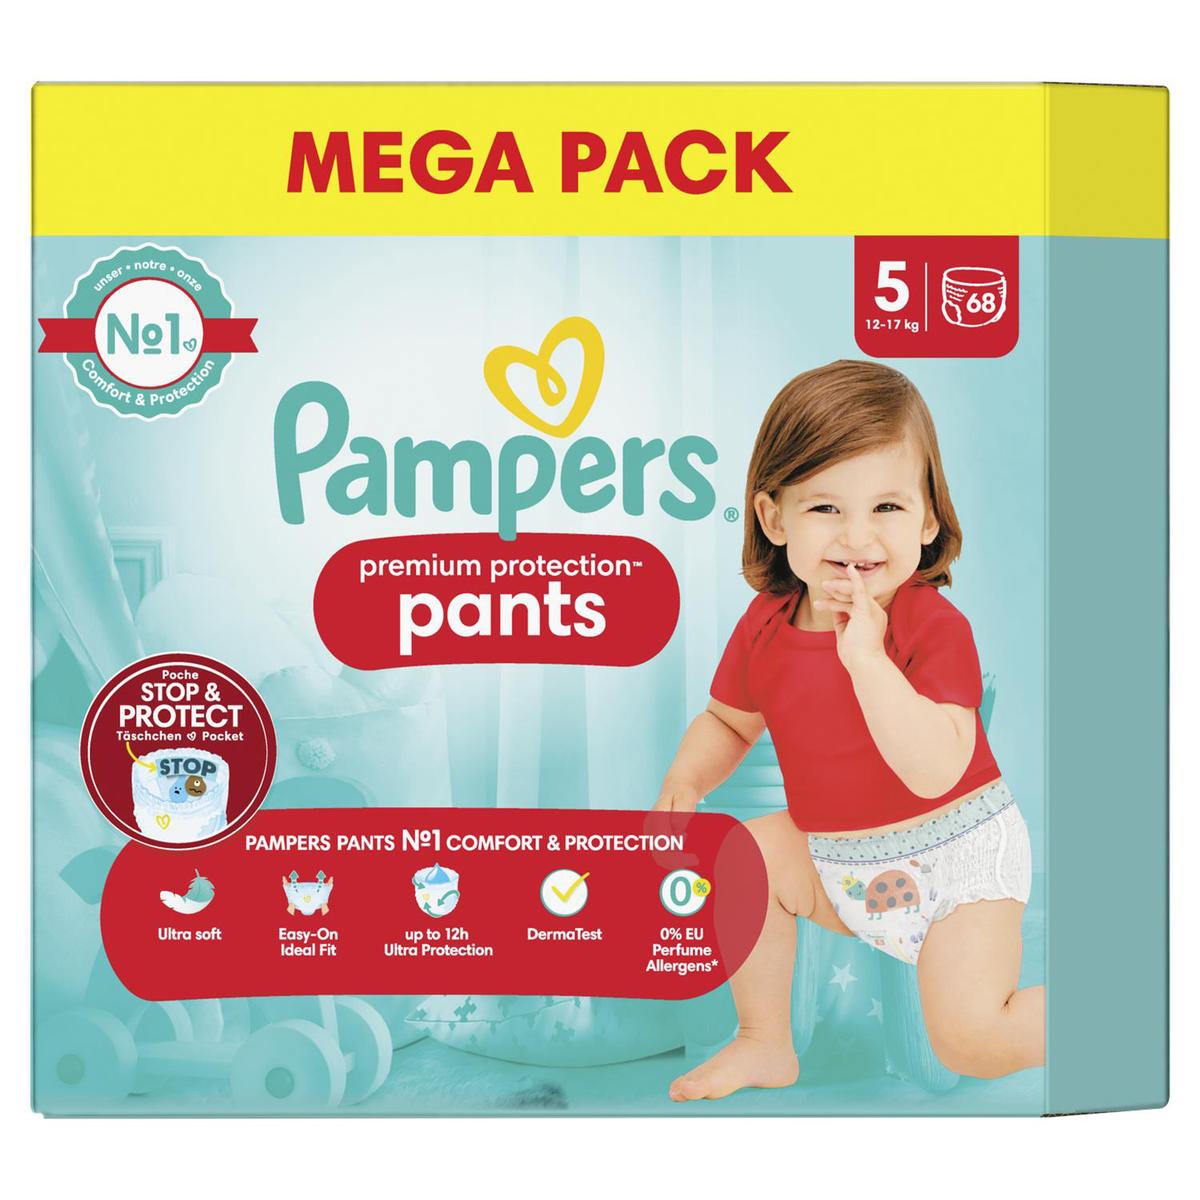 Pampers Baby-Dry Pants Couches-Culottes Taille 7, 62 Culottes